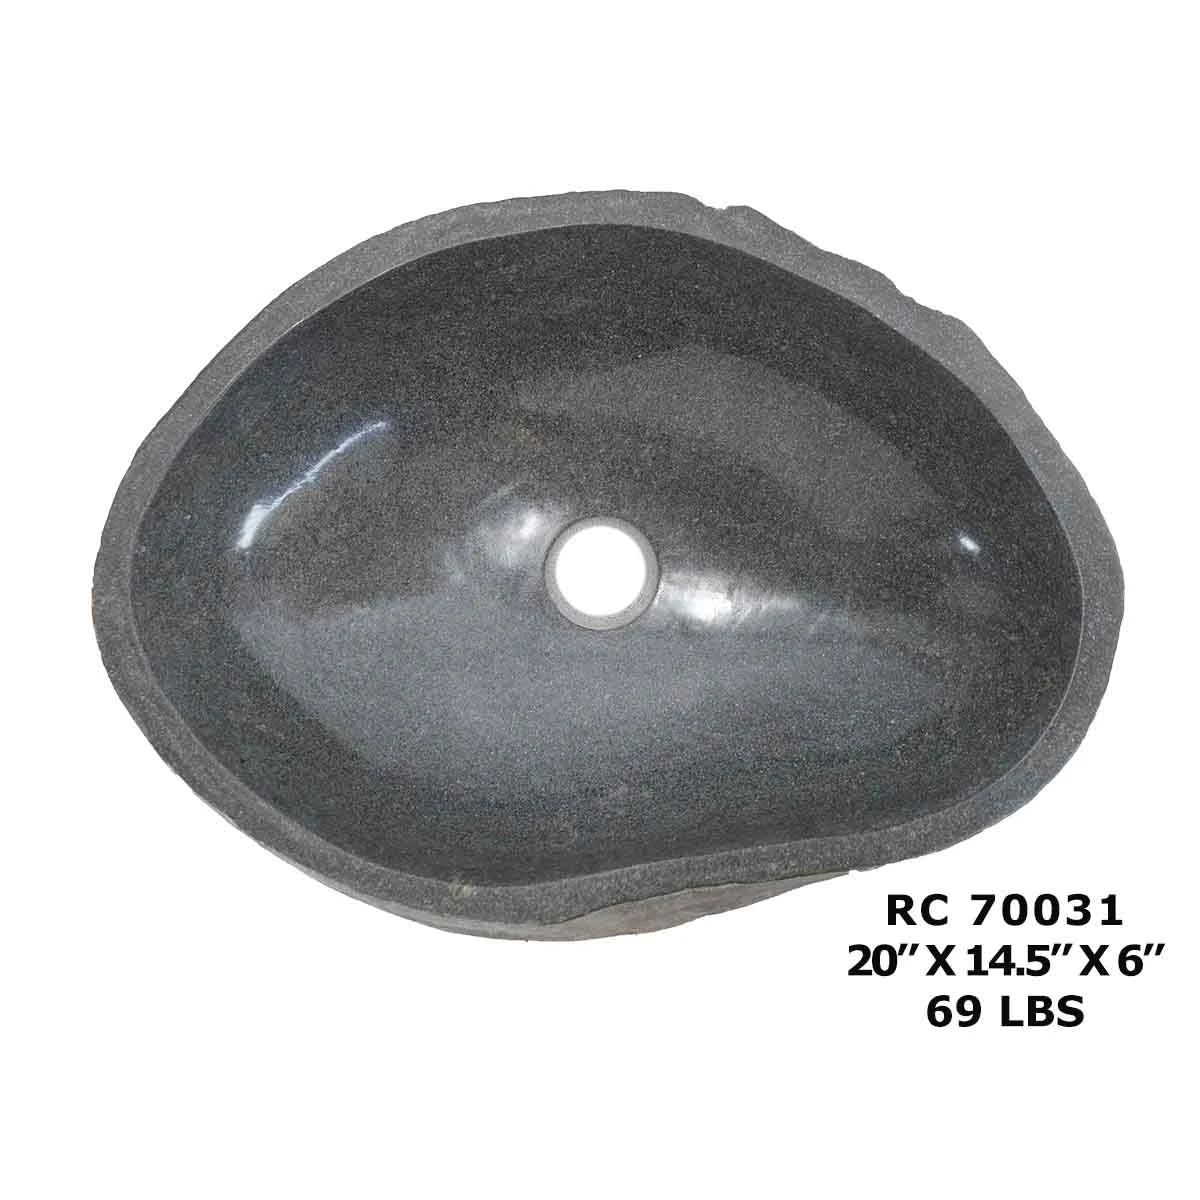 RC70031-Natural River Stone Sink Bowl for Bathroom